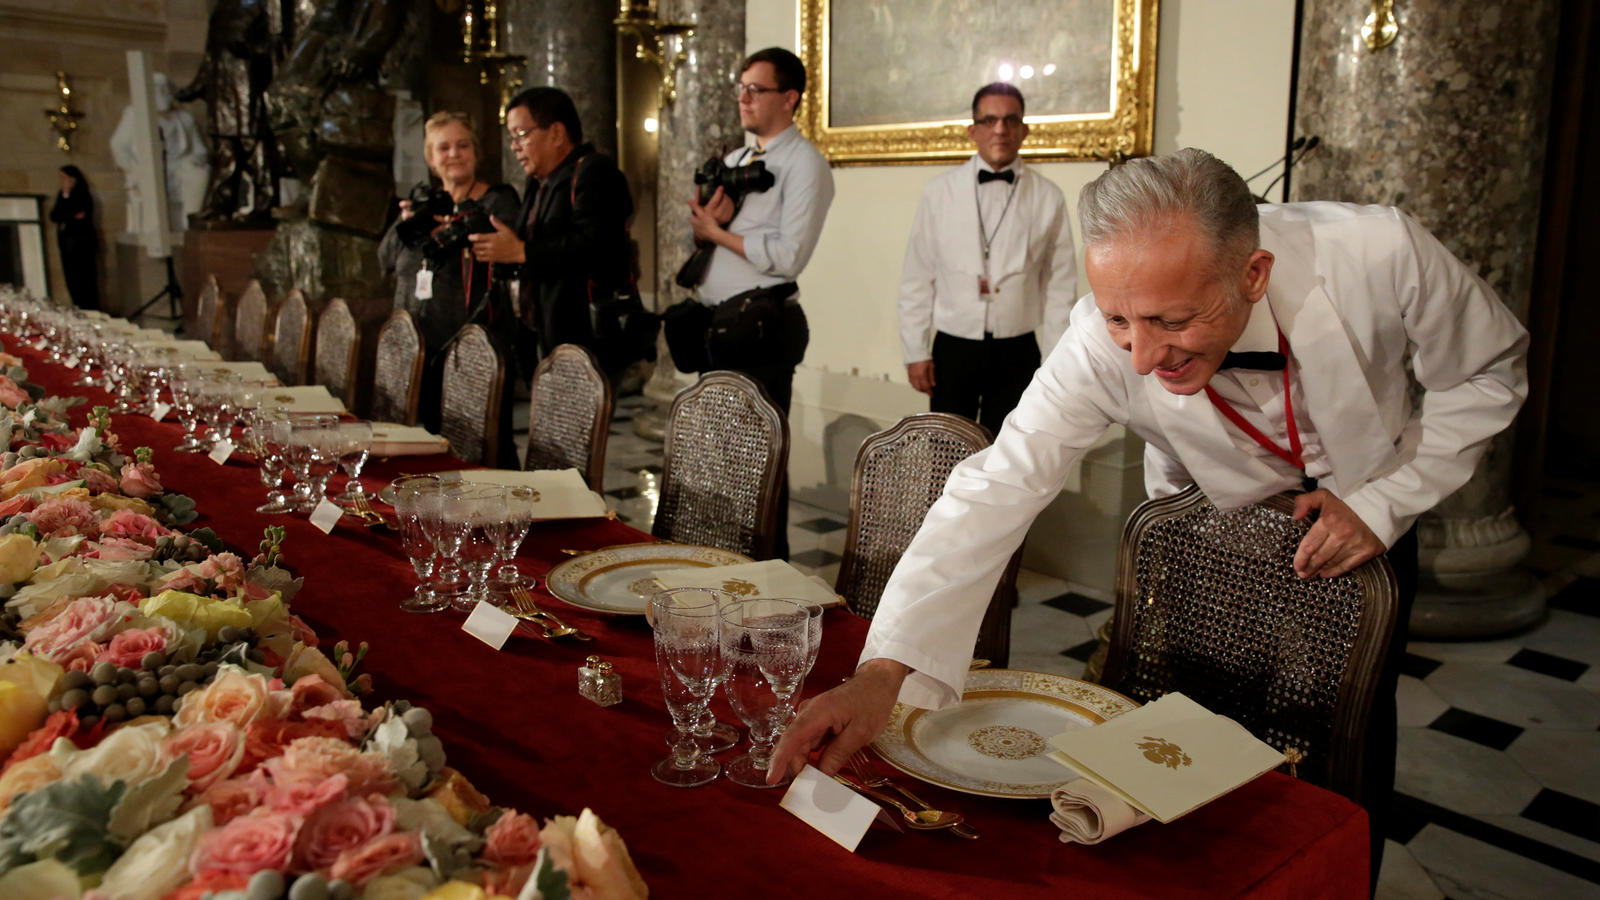 A head waiter puts name tags for U.S. President Donald Trump and members of Congress before the Inaugural Luncheon in Statuary Hall on Capitol Hill in Washington, U.S., January 20, 2017. REUTERS/Yuri Gripas